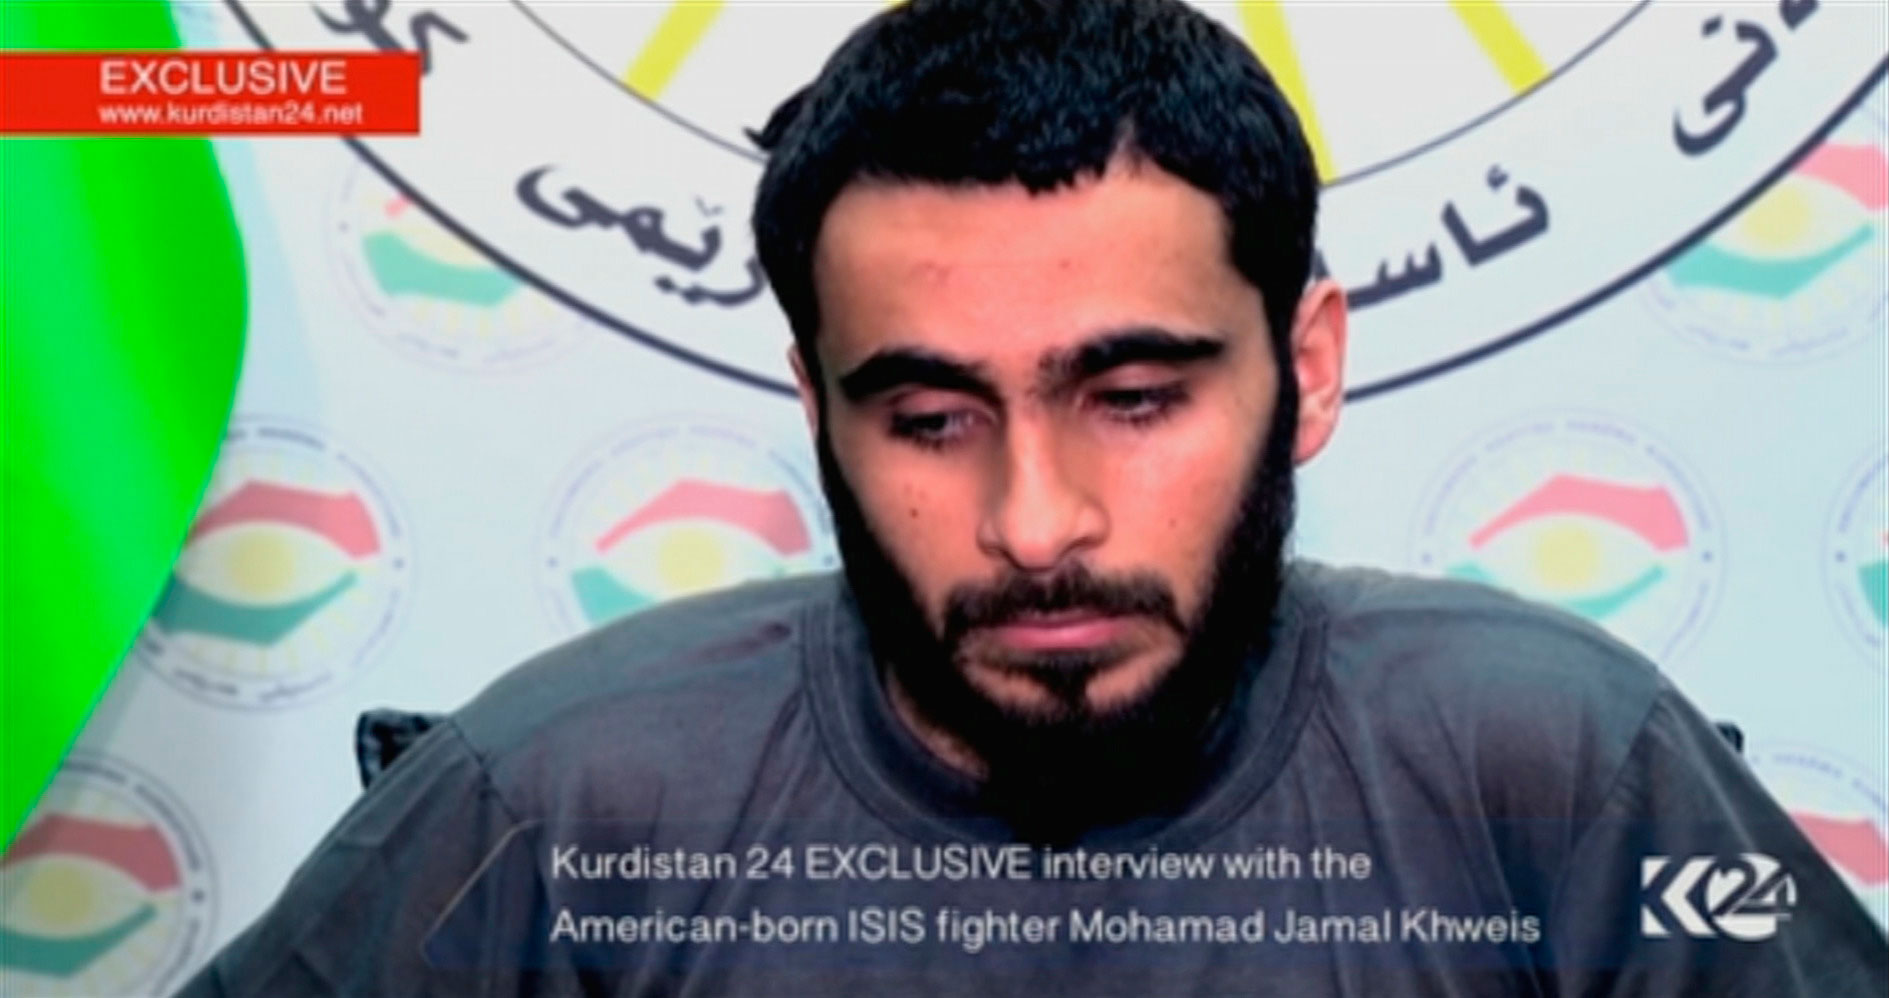 In this still image taken from video on March 16, 2016, a man whose driver's license identifies him as an American speaks during an interview after he said he joined ISIS but later left and was captured by Kurdish forces. (Kurdistan 24/Reuters)